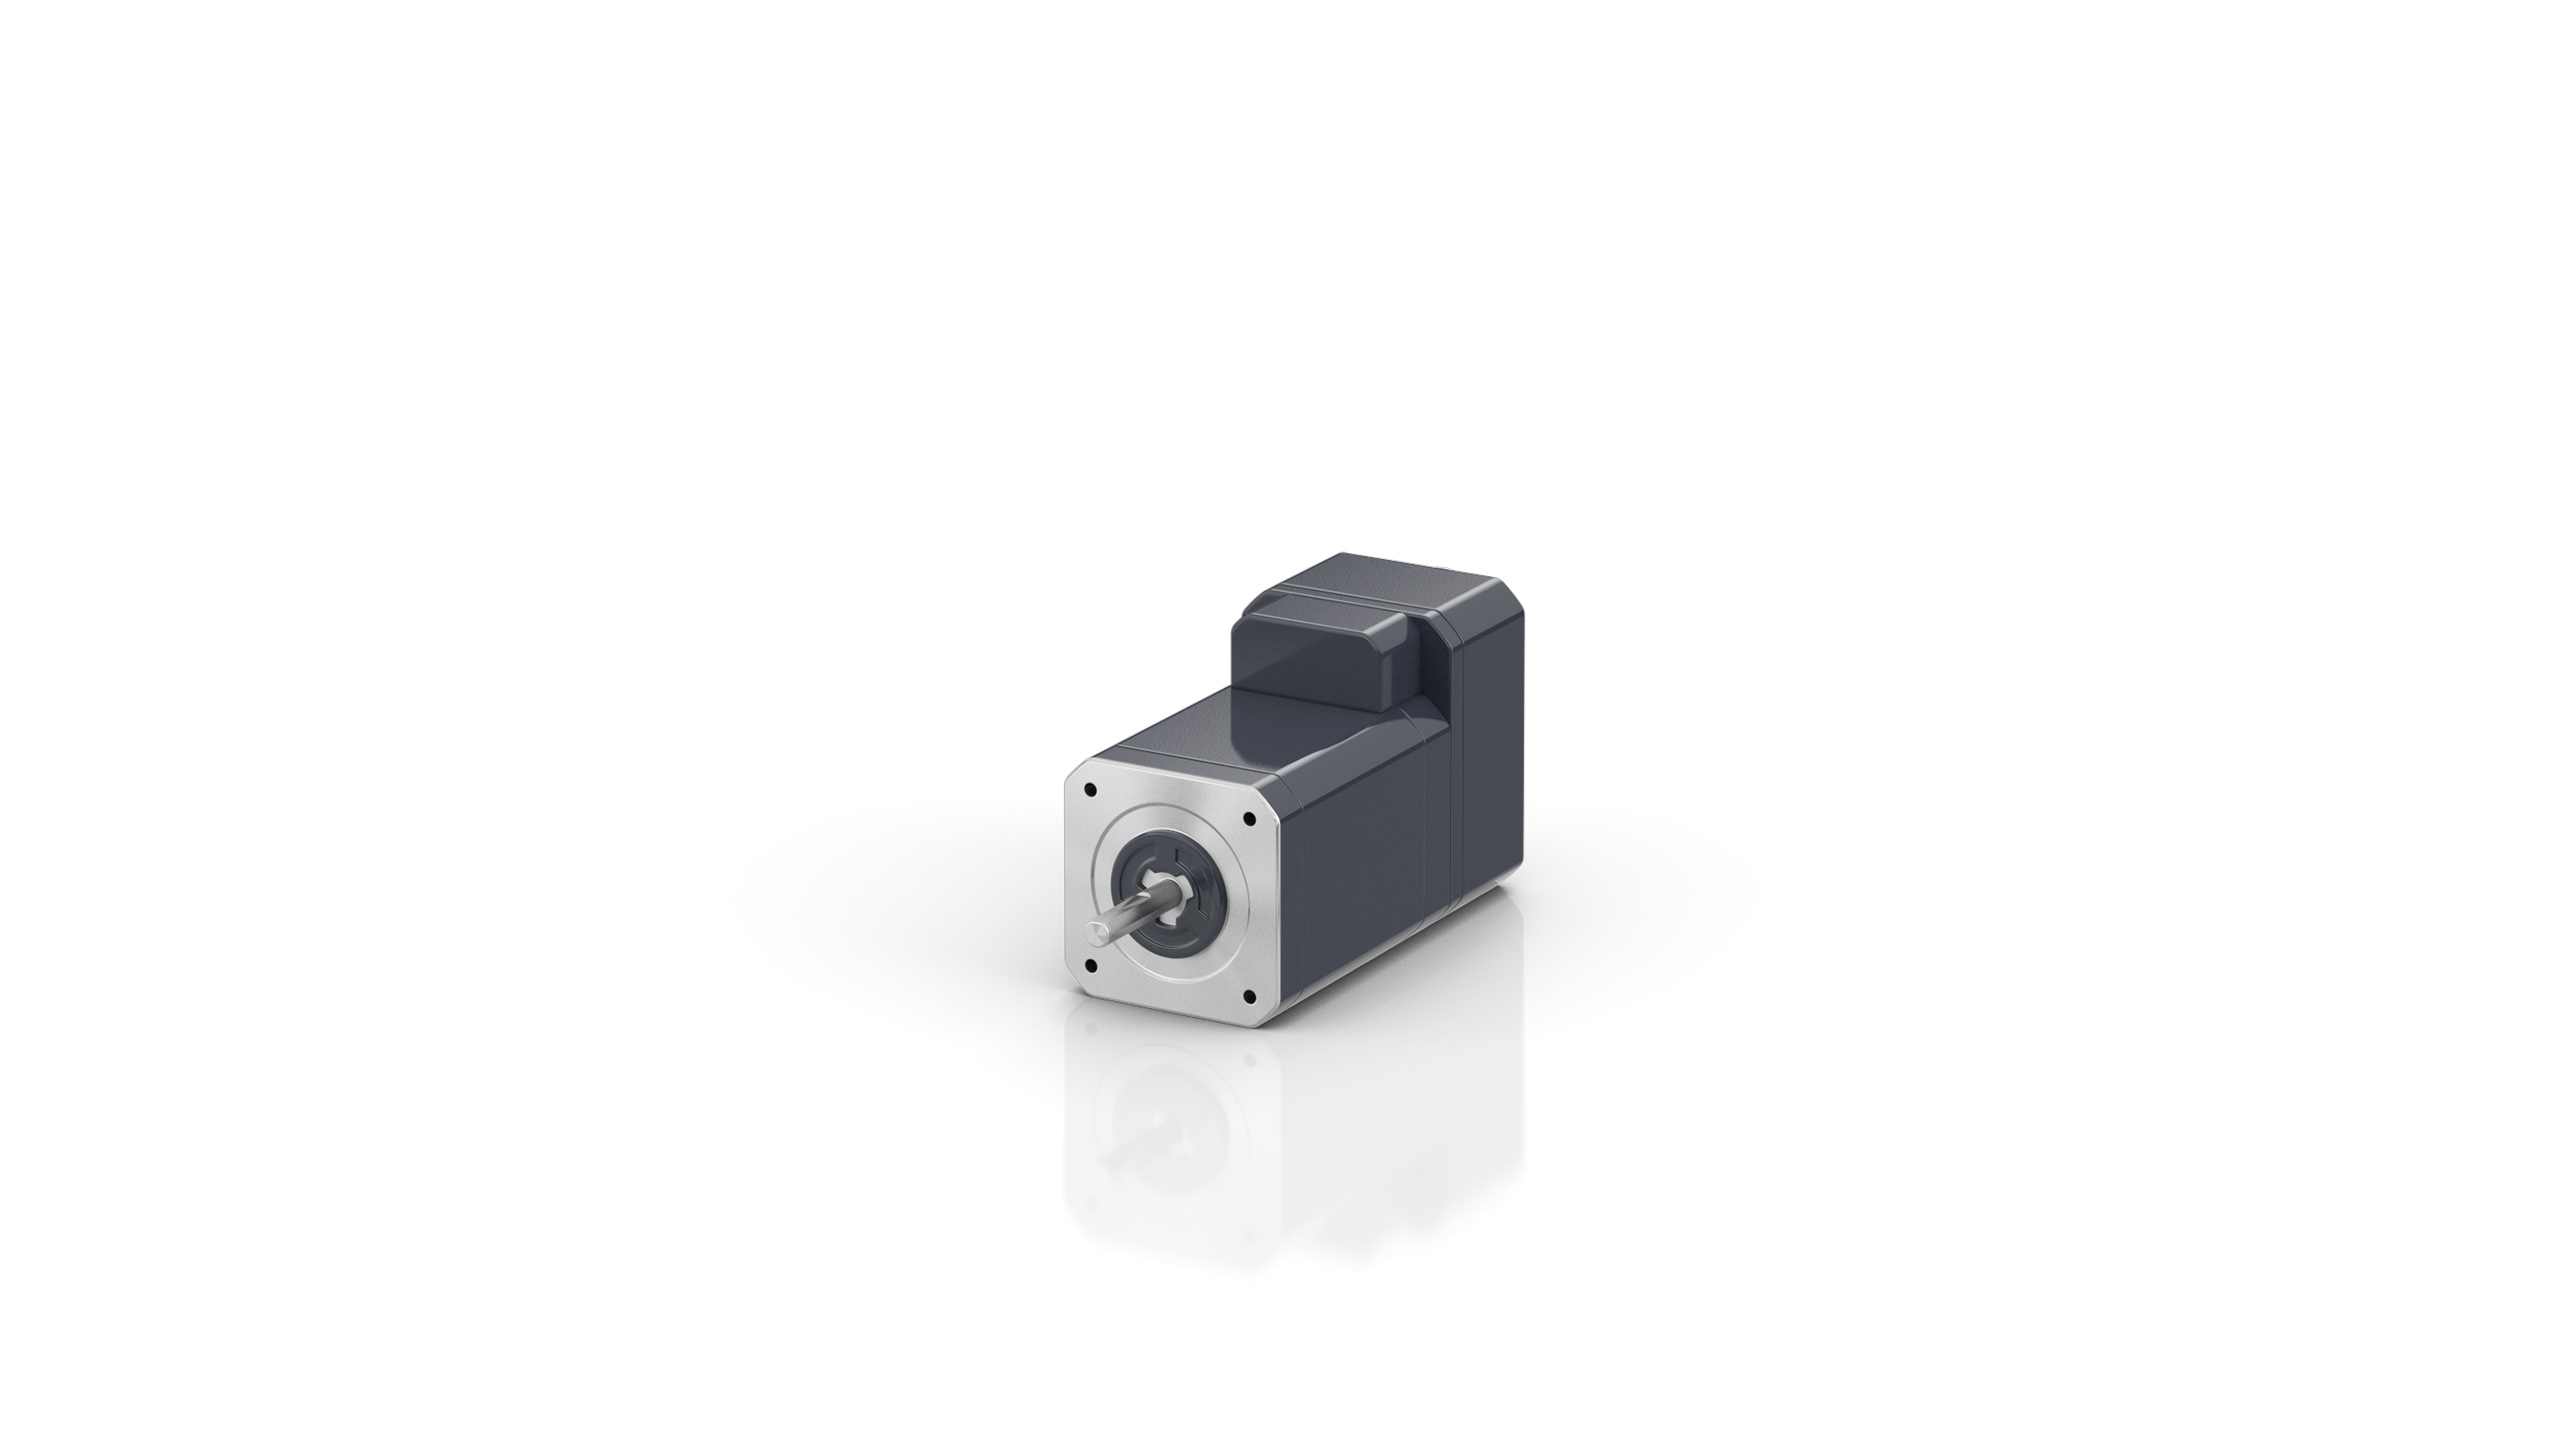 ASI8114-abcc-w1yz | Compact integrated stepper motor drive 0.80 Nm (MH), N1 (NEMA17/42 mm)